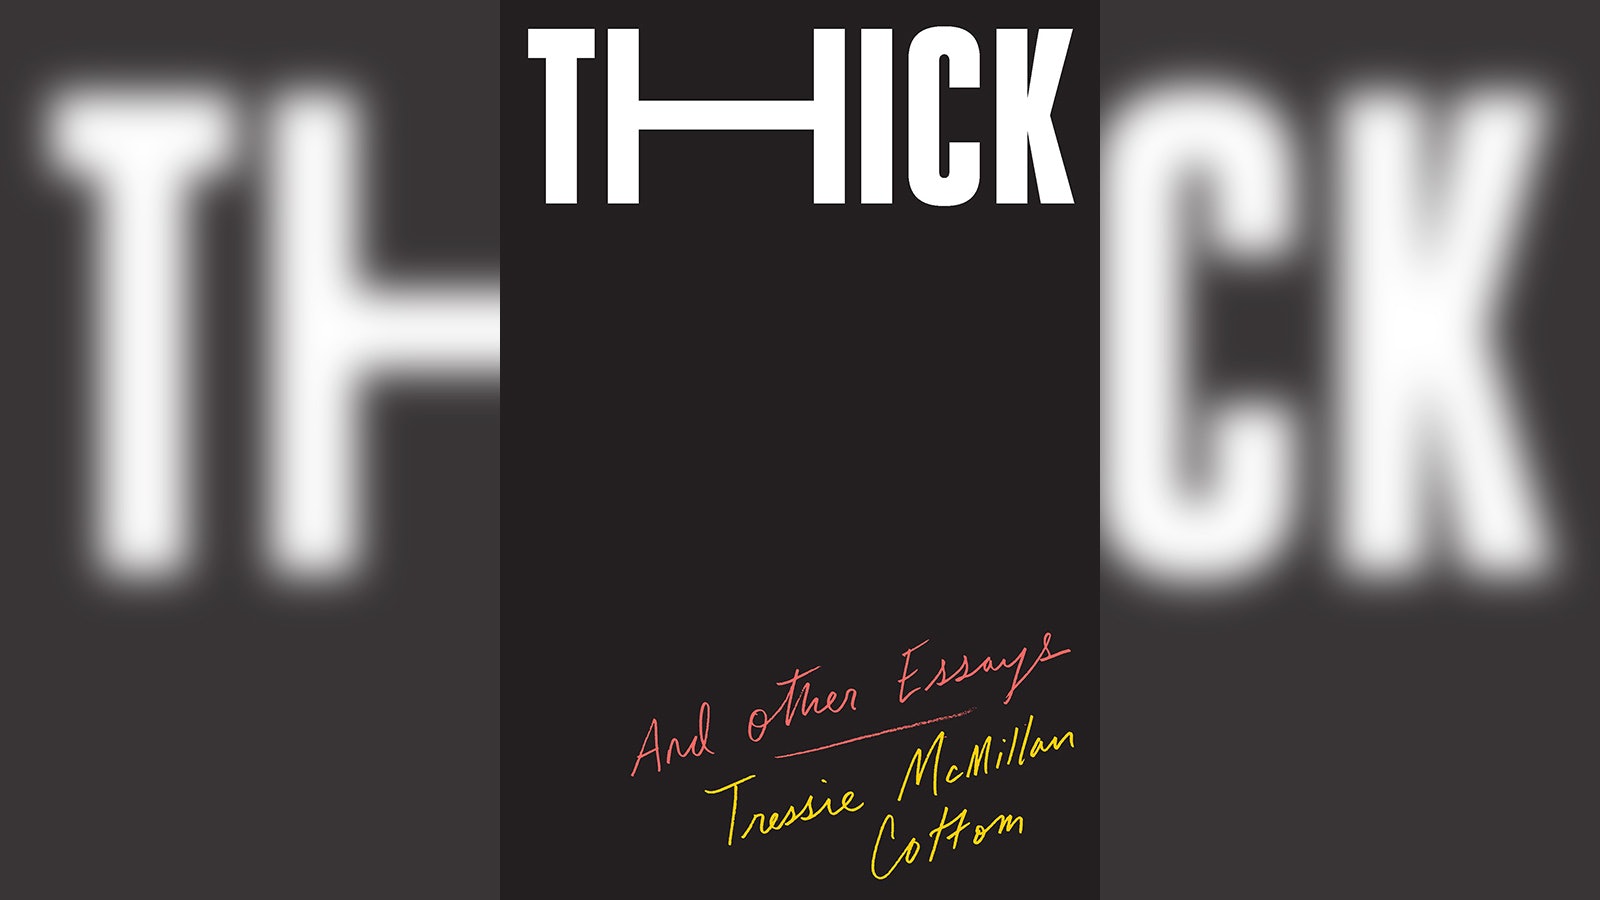 thick by tressie mcmillan